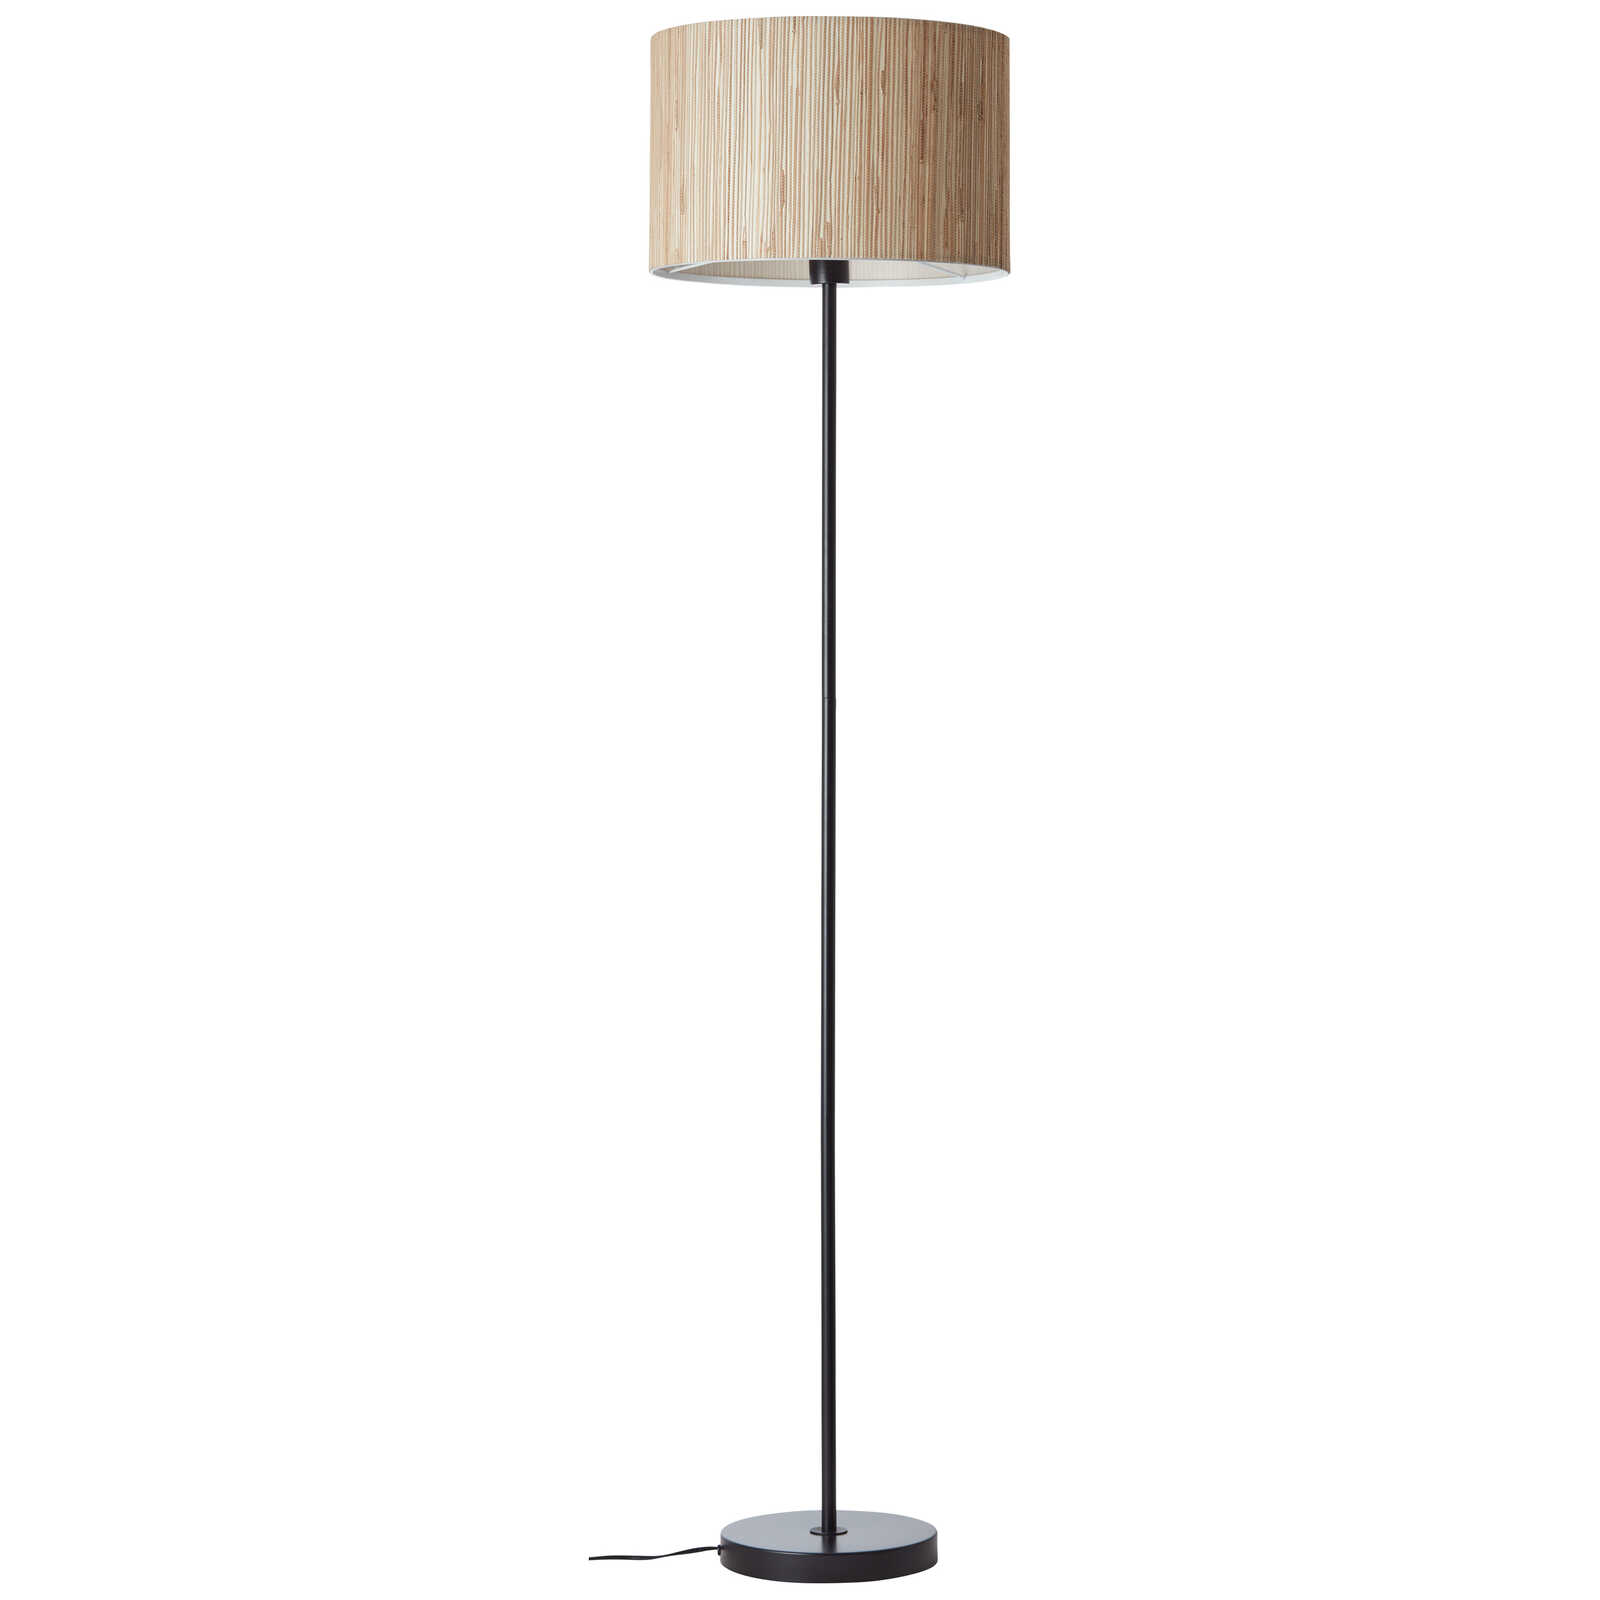             Floor lamp made of seagrass - Valentin 3 - Brown
        